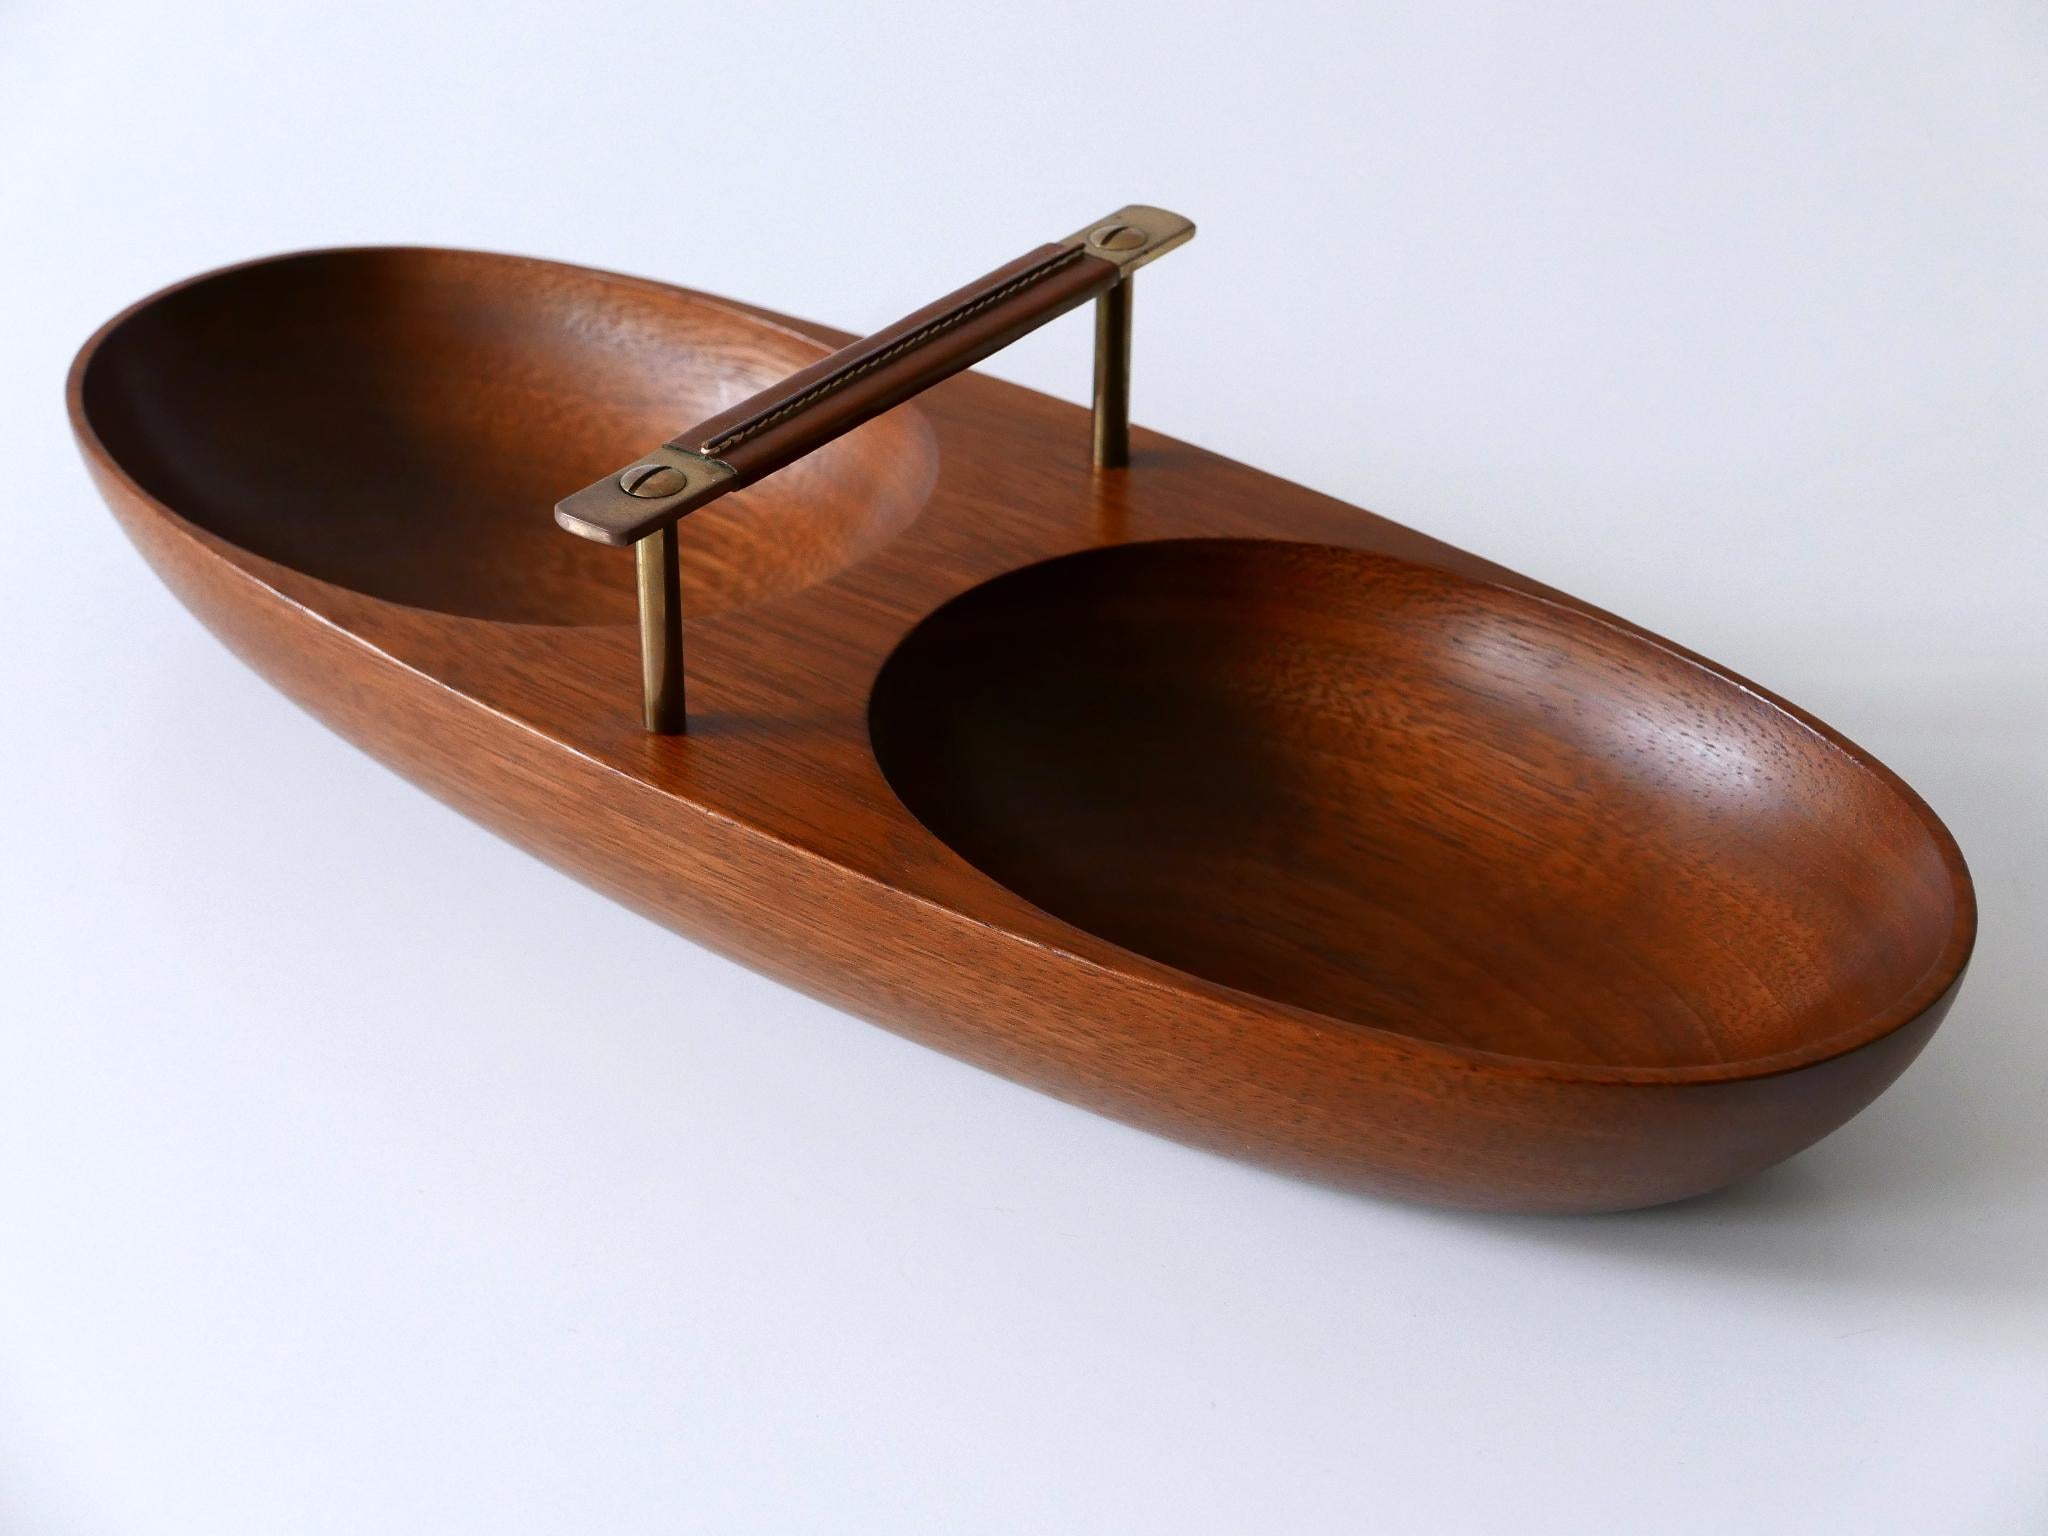 Extremely rare and elegant Mid-Century Modern nut bowl by Carl Auböck II, Vienna, Austria, 1950s.

Executed in solid teak wood and brass handle upholstered in leather.

Dimensions: 
W 15.36 in. (39 cm)
D 5.91 (15 cm)
H 3.86 (9.8 cm)

Good